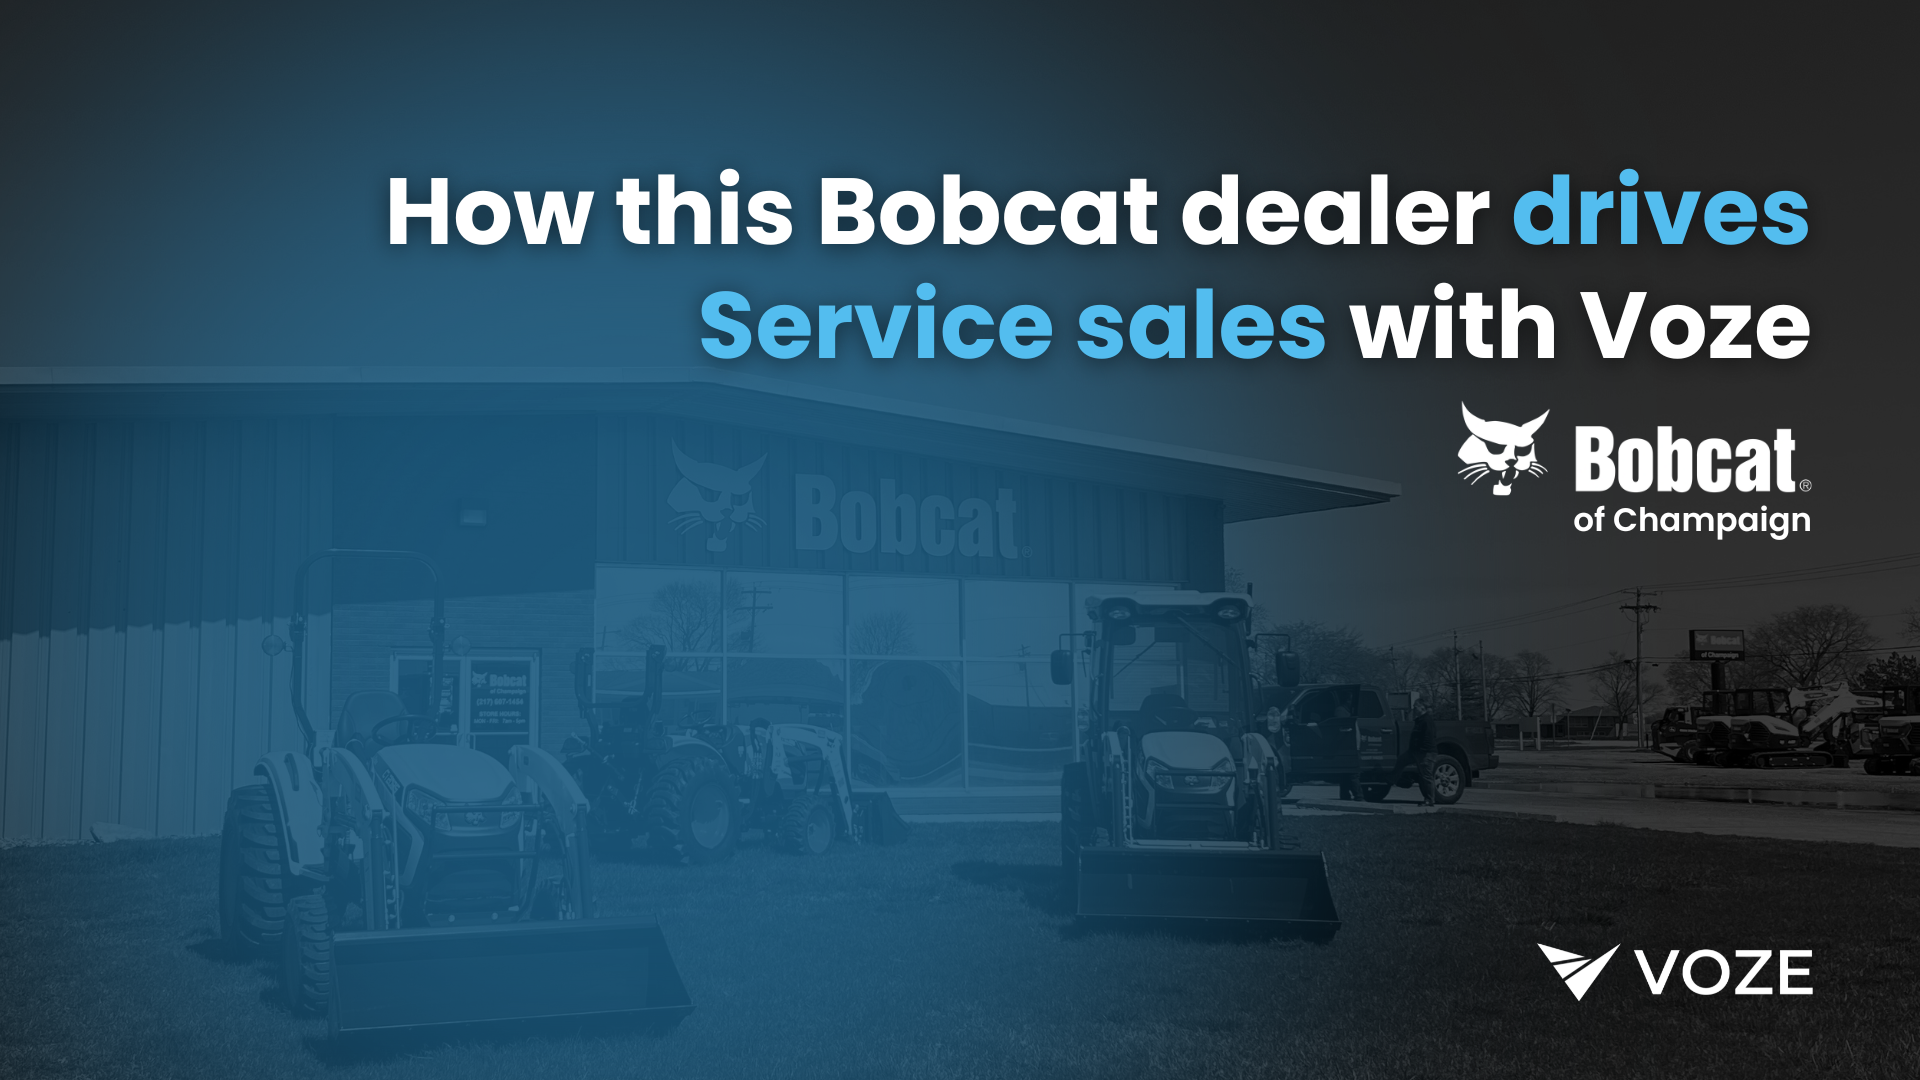 How This Bobcat Dealer Drives Service Sales With Voze